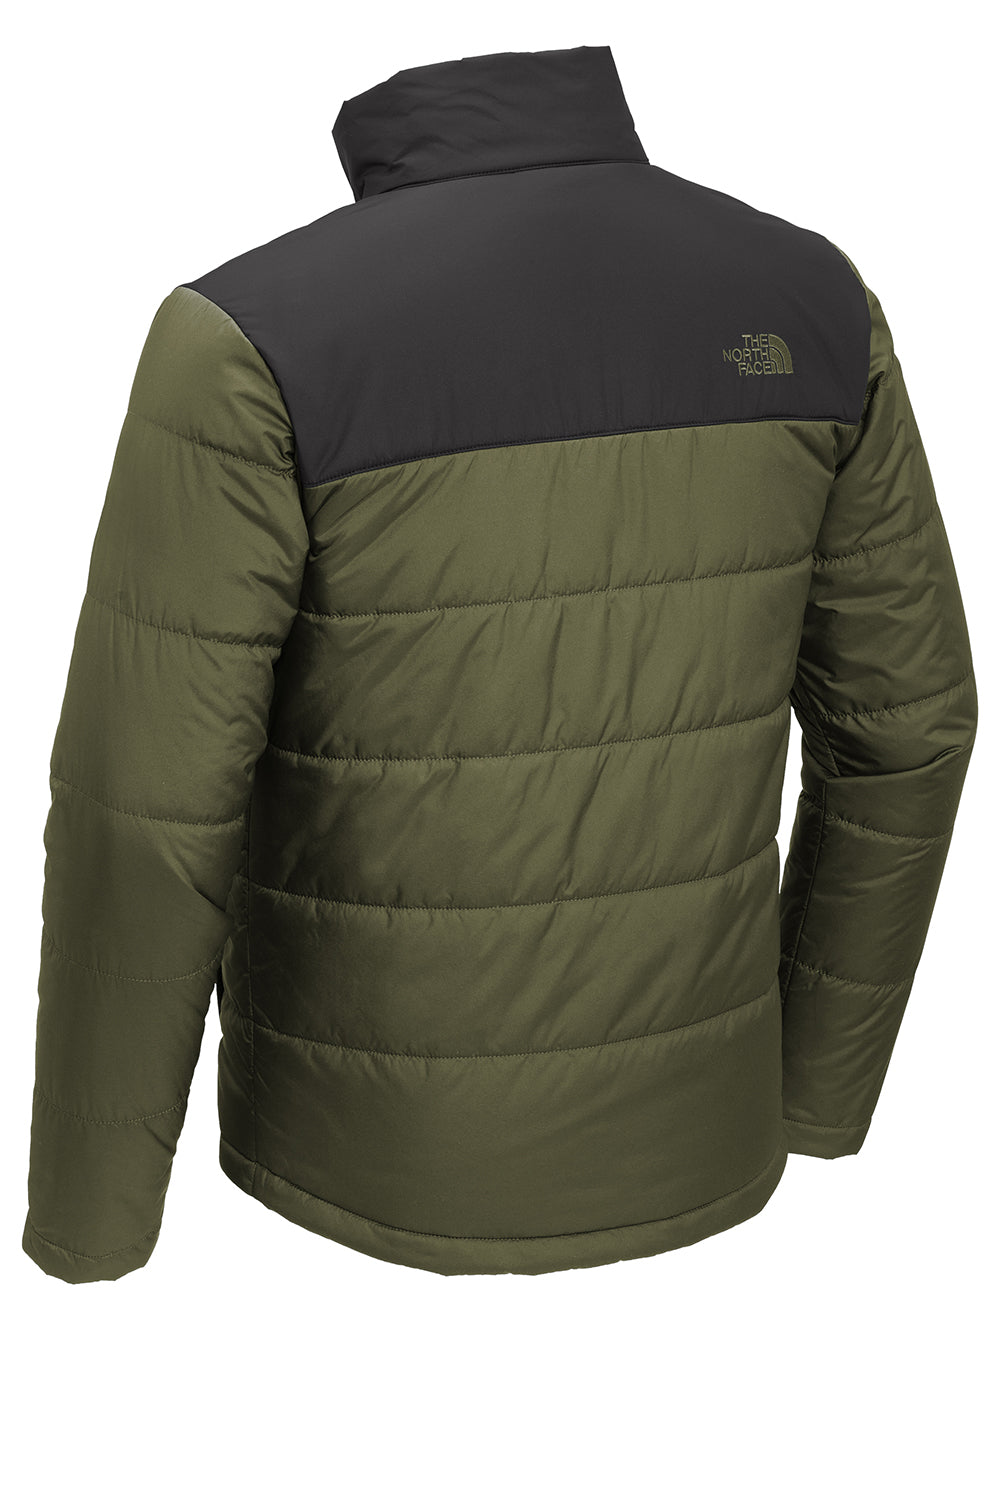 The North Face NF0A7V6J Mens Everyday Insulated Full Zip Jacket Burnt Olive Green Flat Back